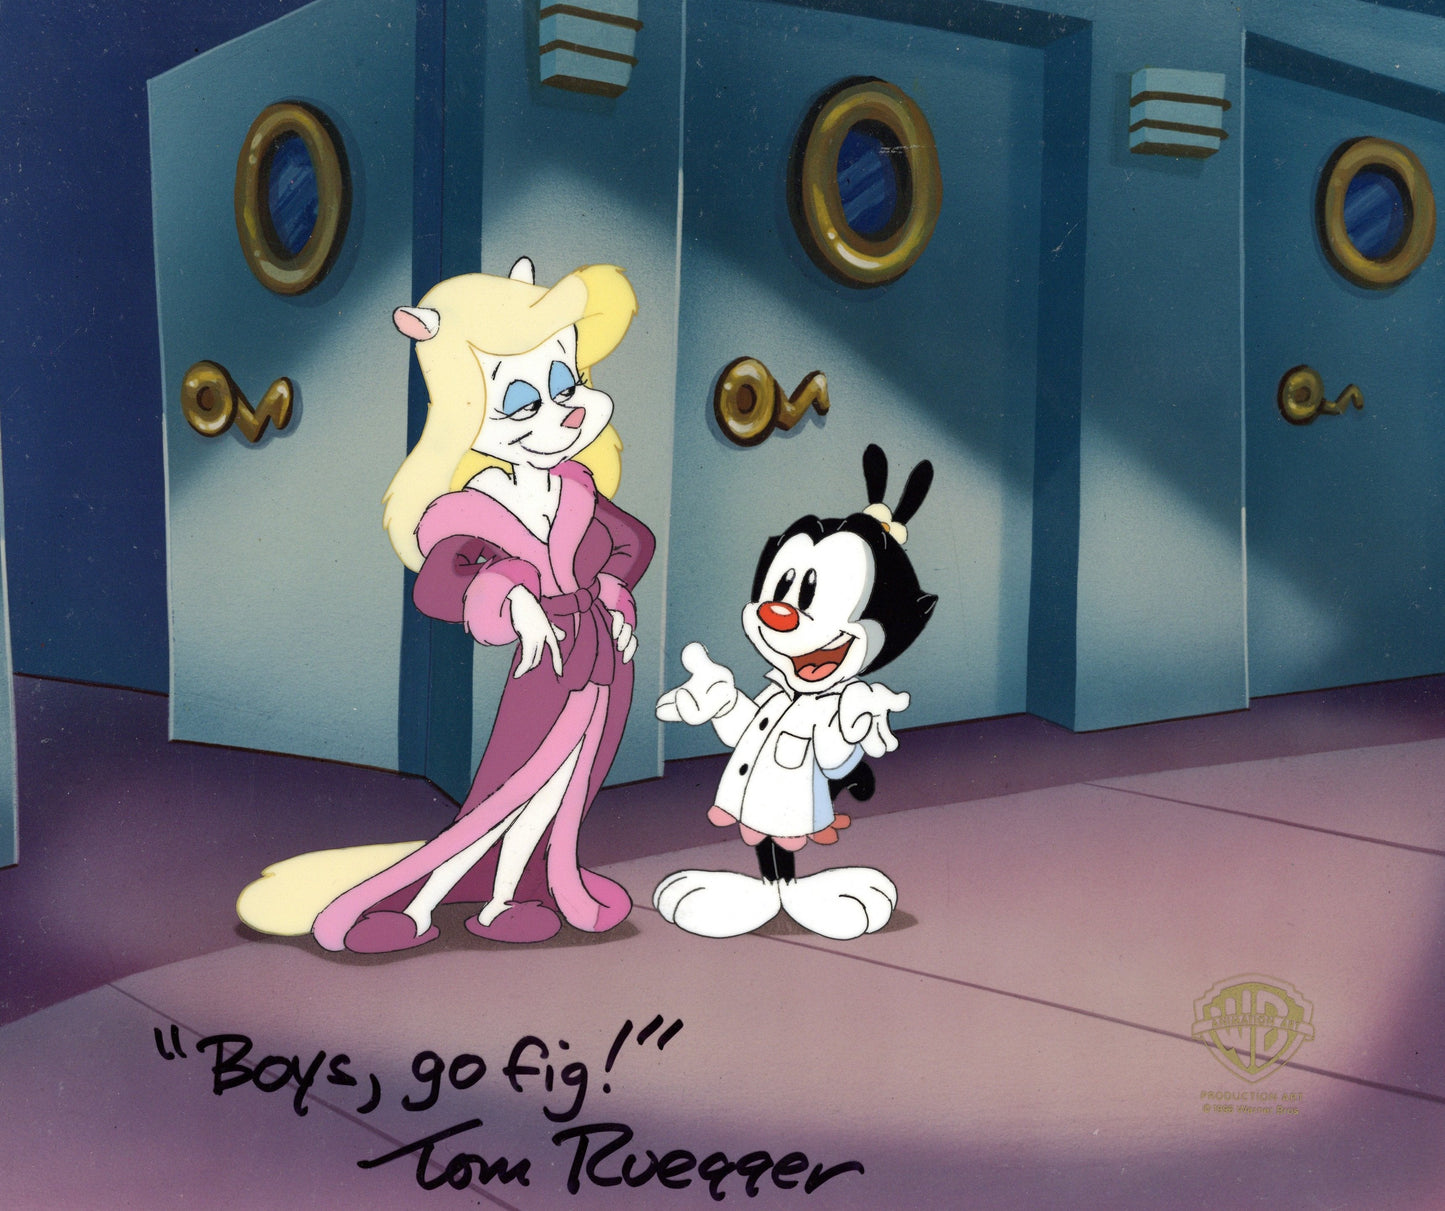 Animaniacs Original Production Cel Signed by Tom Ruegger: Minerva and Dot